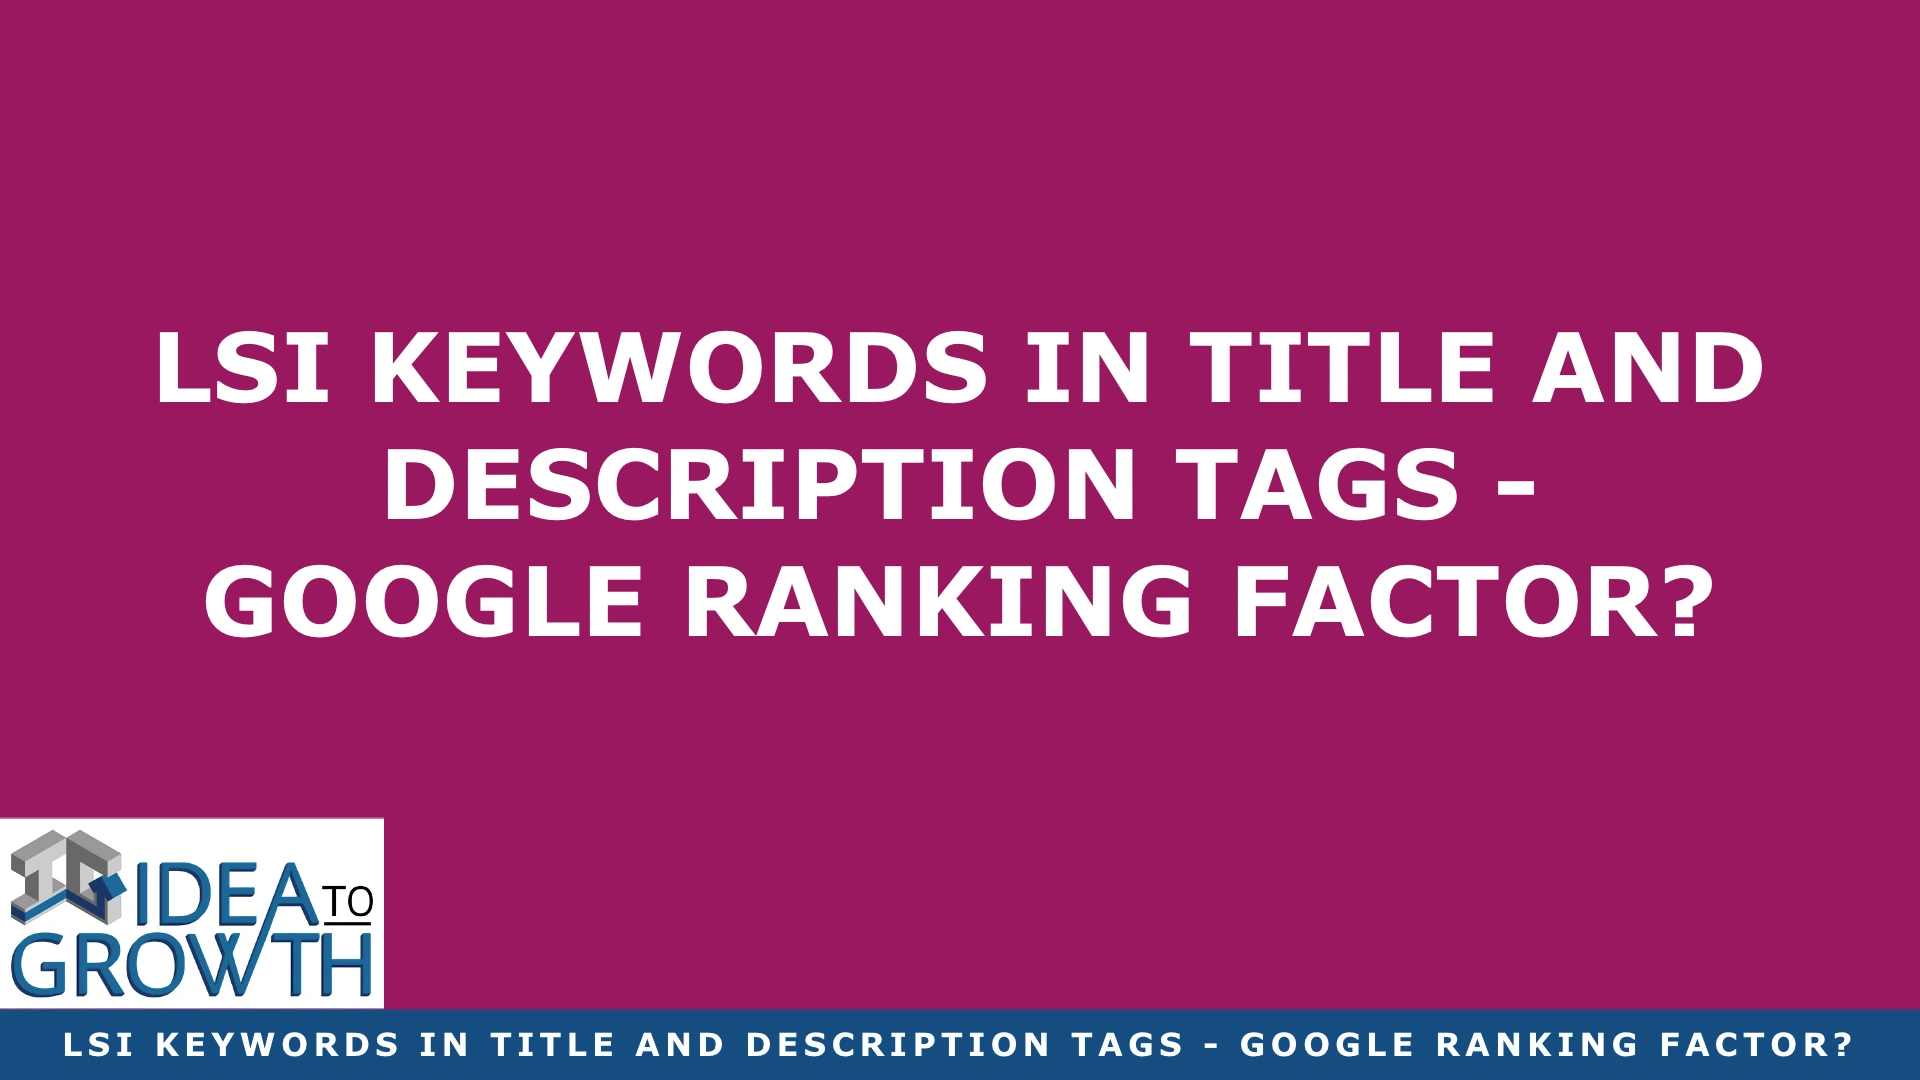 LSI KEYWORDS IN TITLE AND DESCRIPTION TAGS – GOOGLE RANKING FACTOR?